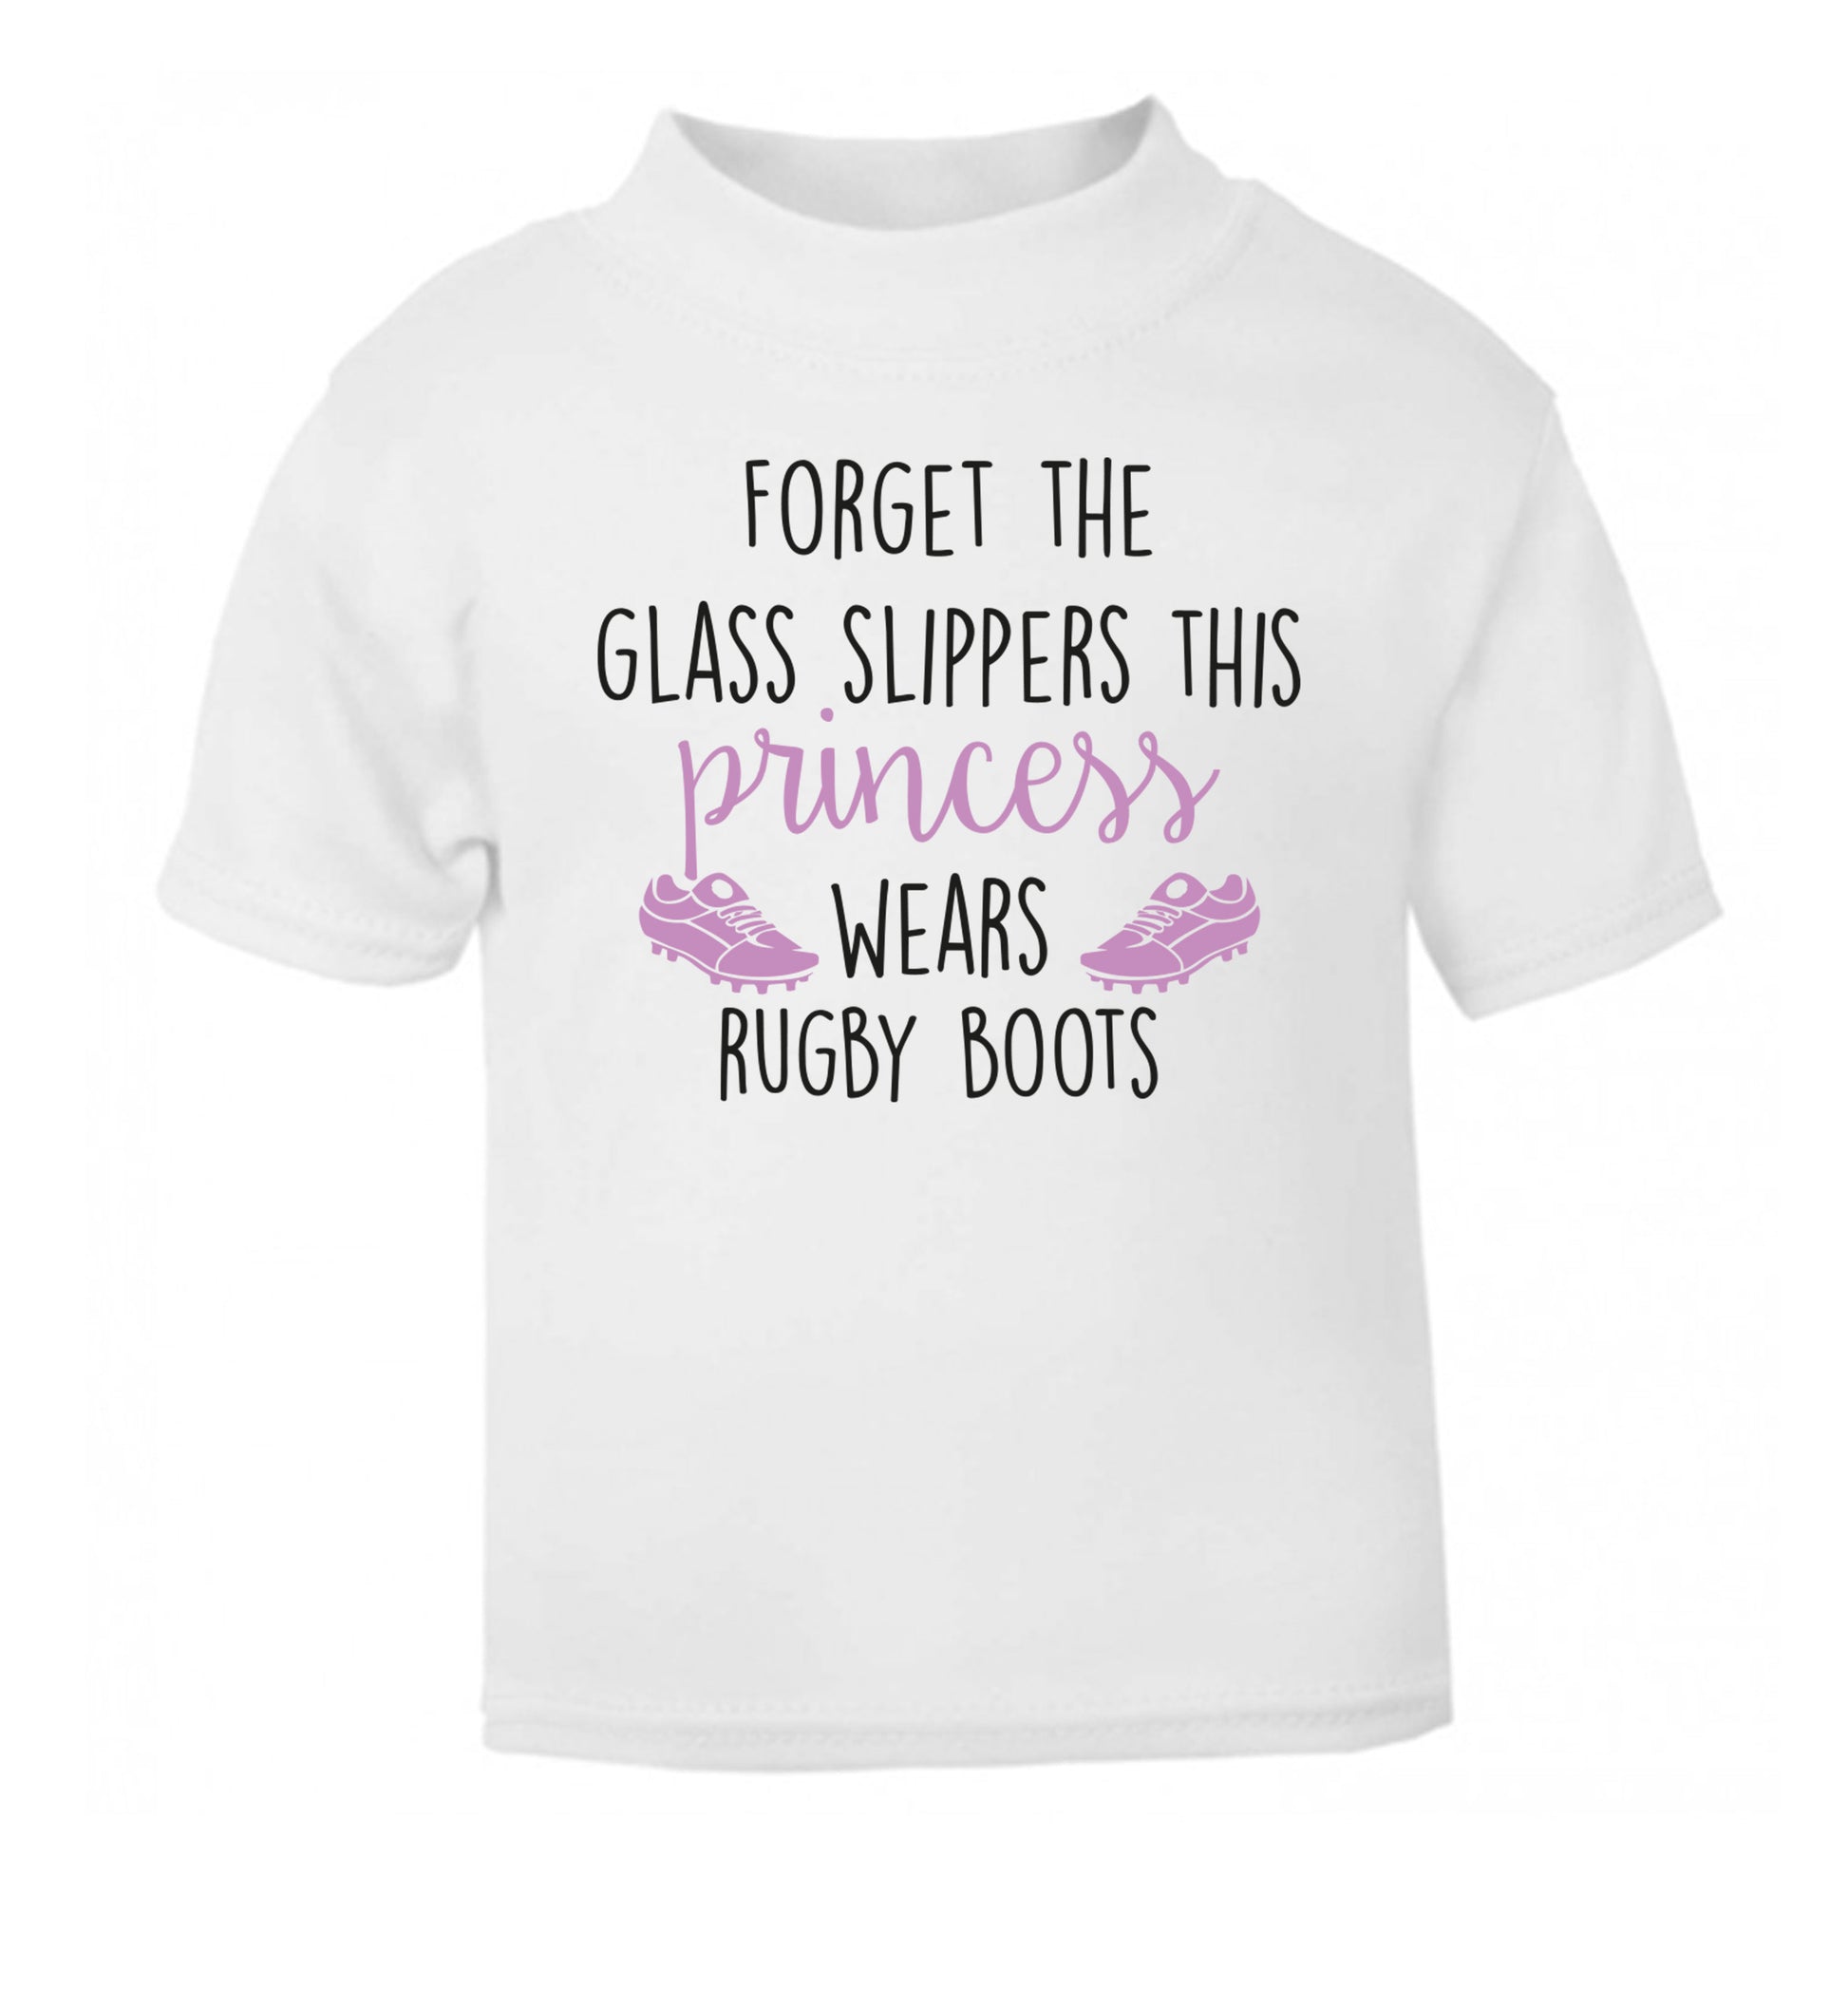 Forget the glass slippers this princess wears rugby boots white Baby Toddler Tshirt 2 Years